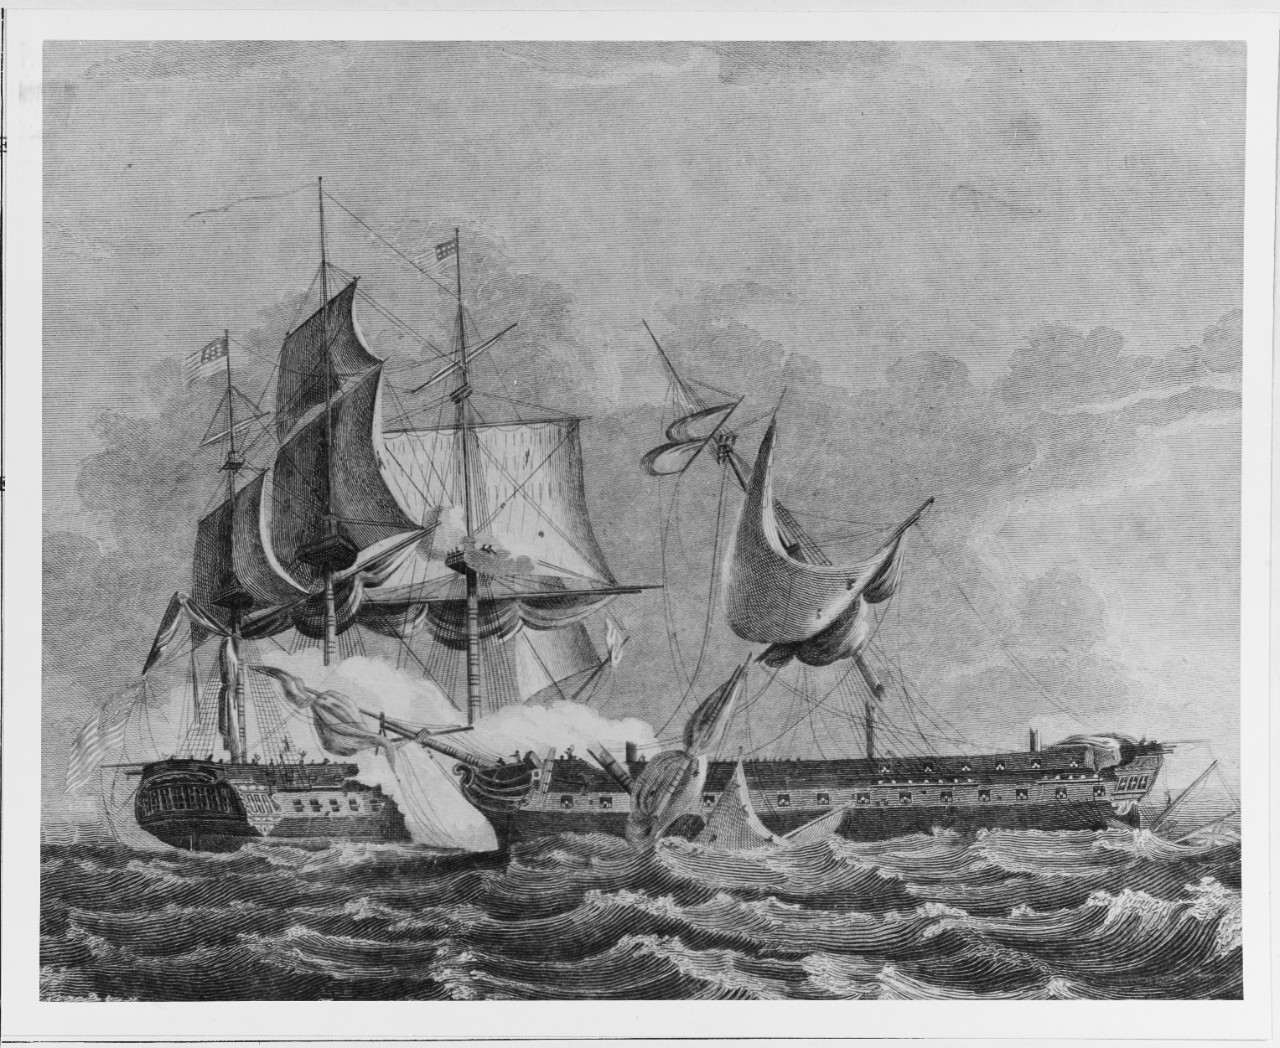 Photo #: NH 42069  Action between USS Constitution and HMS Guerriere, 19 August 1812